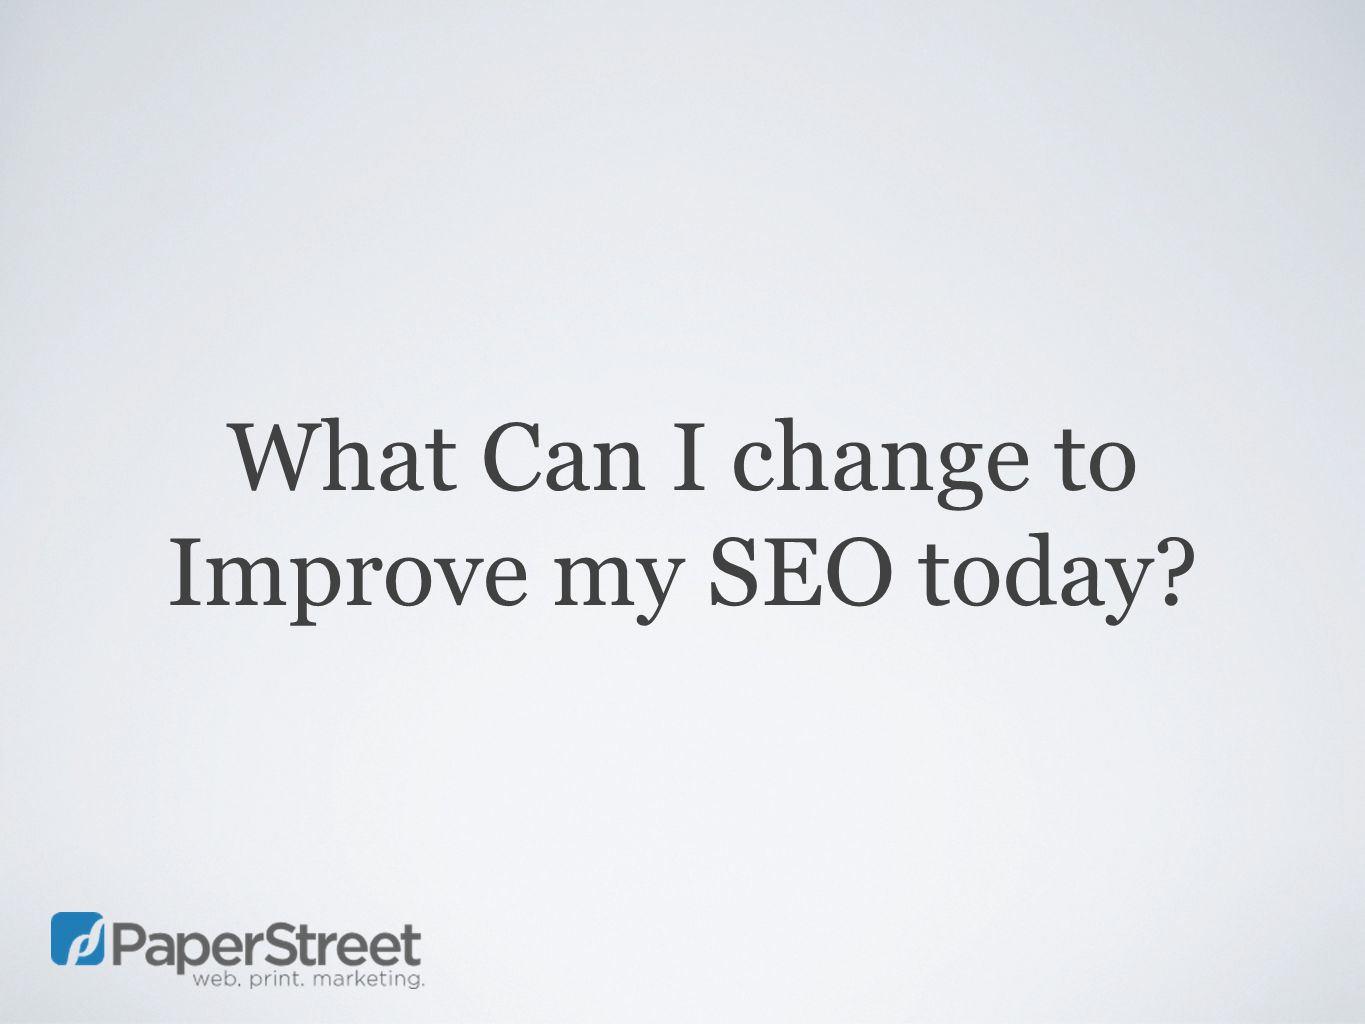 What Can I change to Improve my SEO today